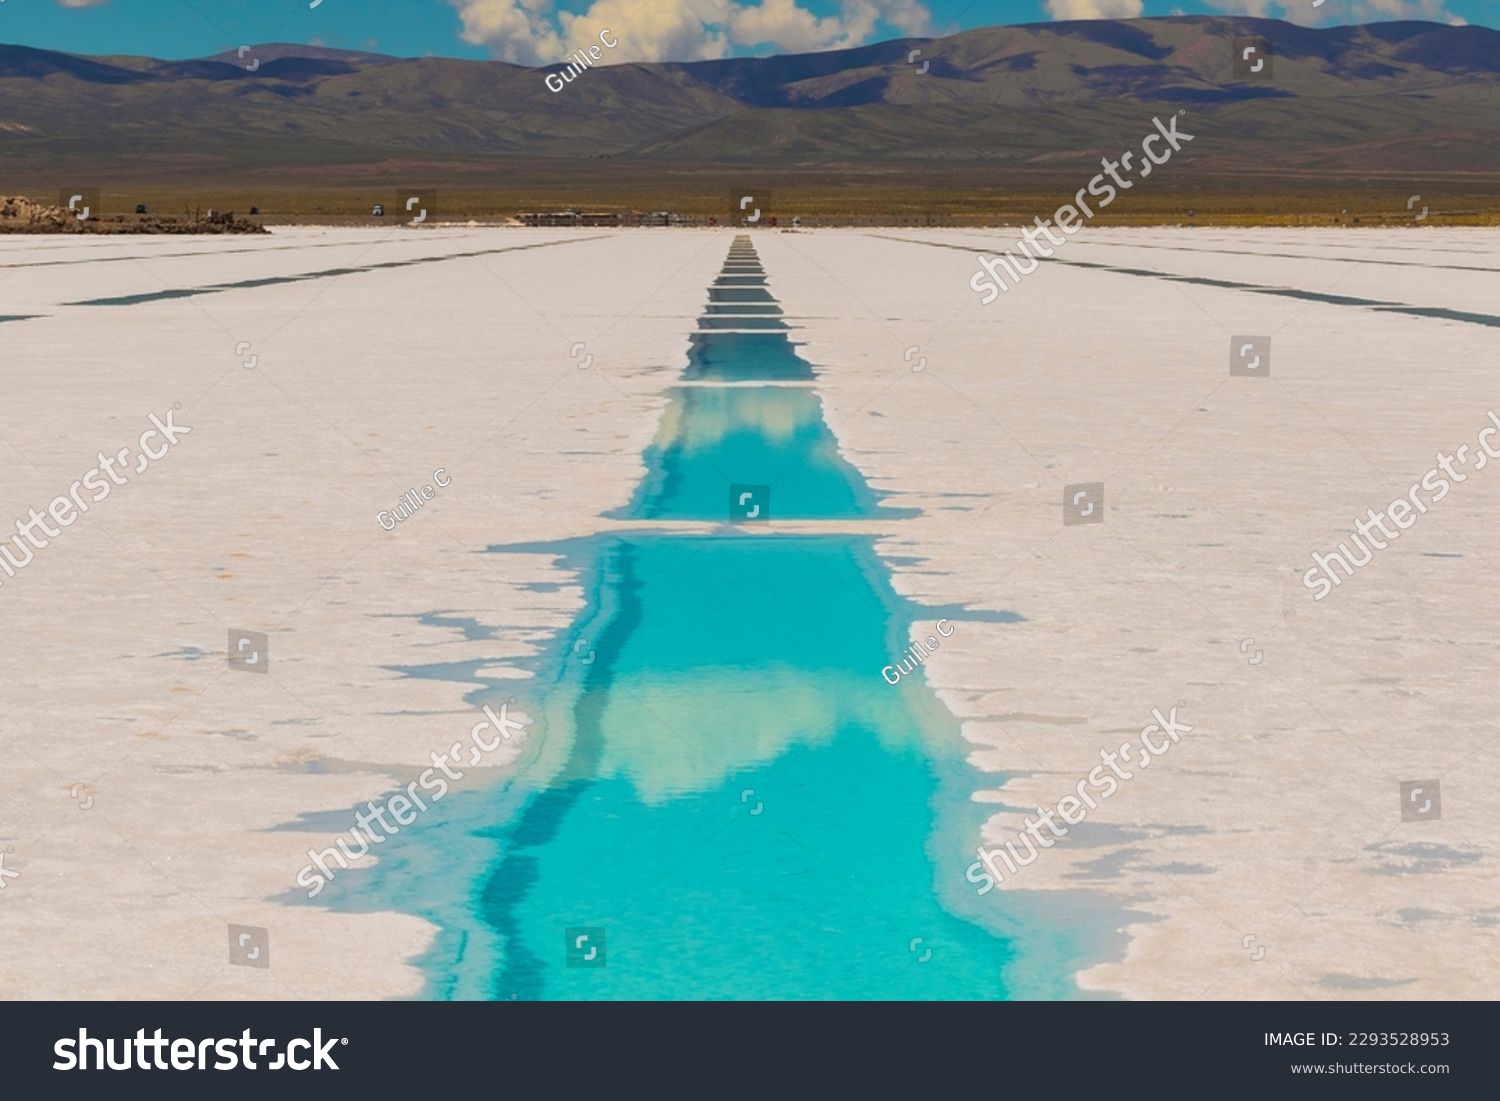 Pools for the extraction of lithium in Salinas Grandes, Jujuy, Argentina #2293528953